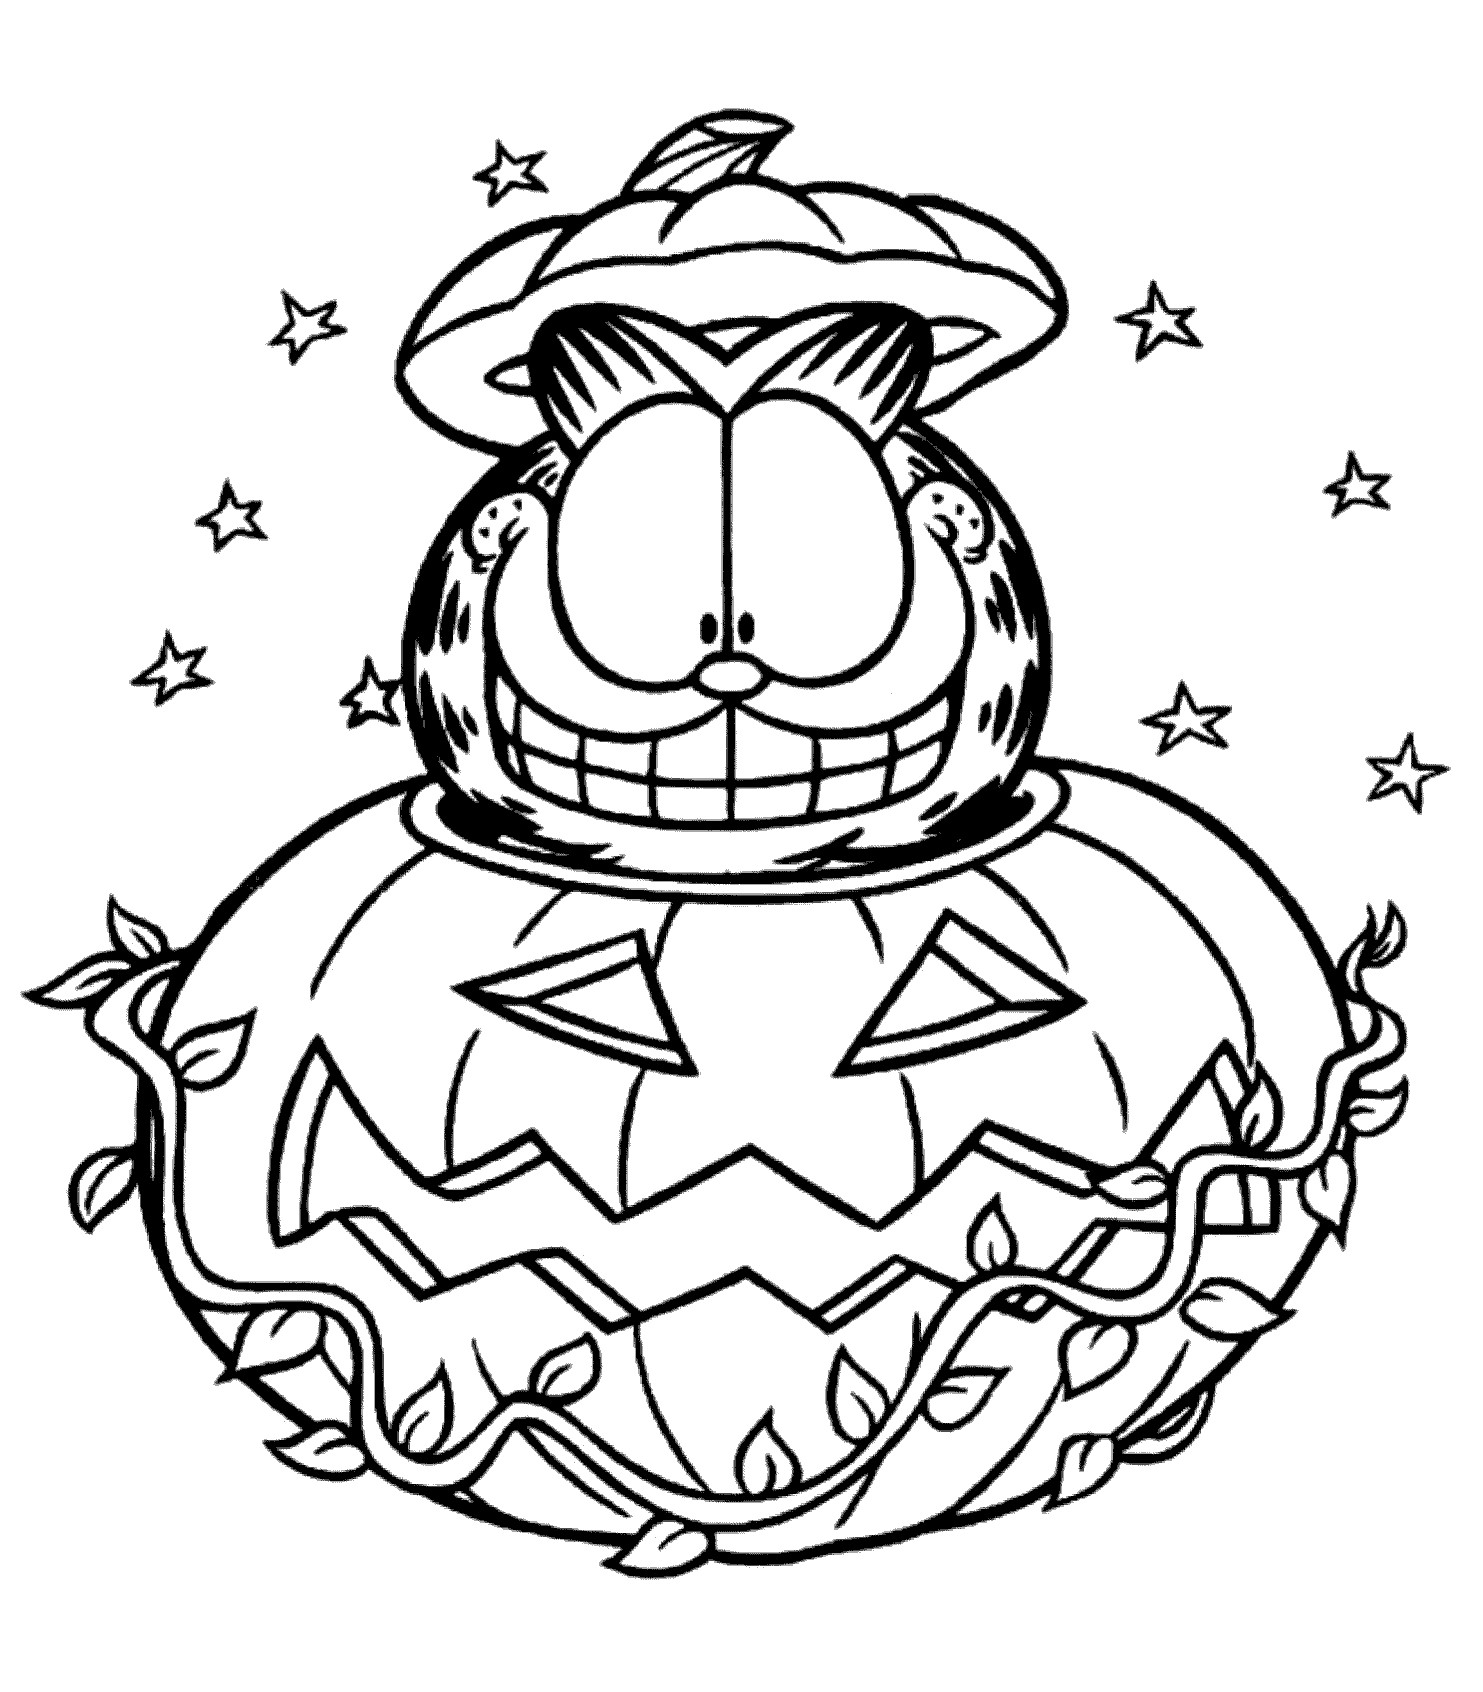 Kids Halloween Coloring Pages
 Garfield Halloween Coloring Pages For Kids Printable Free